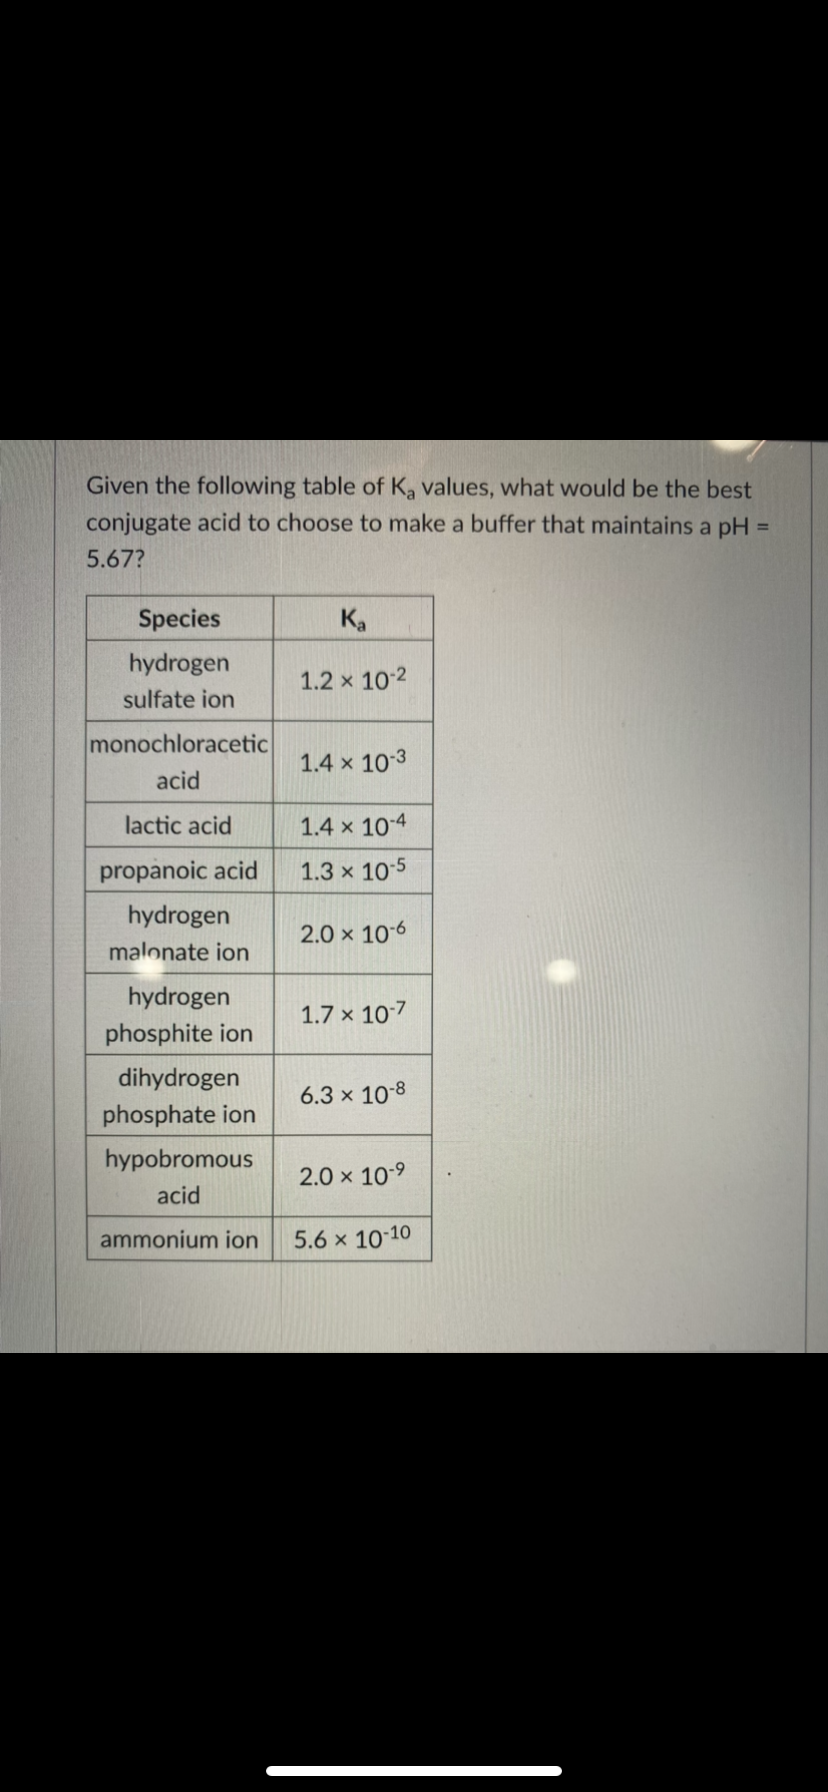 Given the following table of K, values, what would be the best
conjugate acid to choose to make a buffer that maintains a pH =
%3D
5.67?
Species
Ka
hydrogen
1.2 x 10-2
sulfate ion
monochloracetic
1.4 x 10-3
acid
lactic acid
1.4 x 104
propanoic acid
1.3 x 10:5
hydrogen
2.0 x 106
malonate ion
hydrogen
1.7 x 107
phosphite ion
dihydrogen
6.3 x 10-8
phosphate ion
hypobromous
2.0 x 10-9
acid
ammonium ion
5.6 x 10 10
